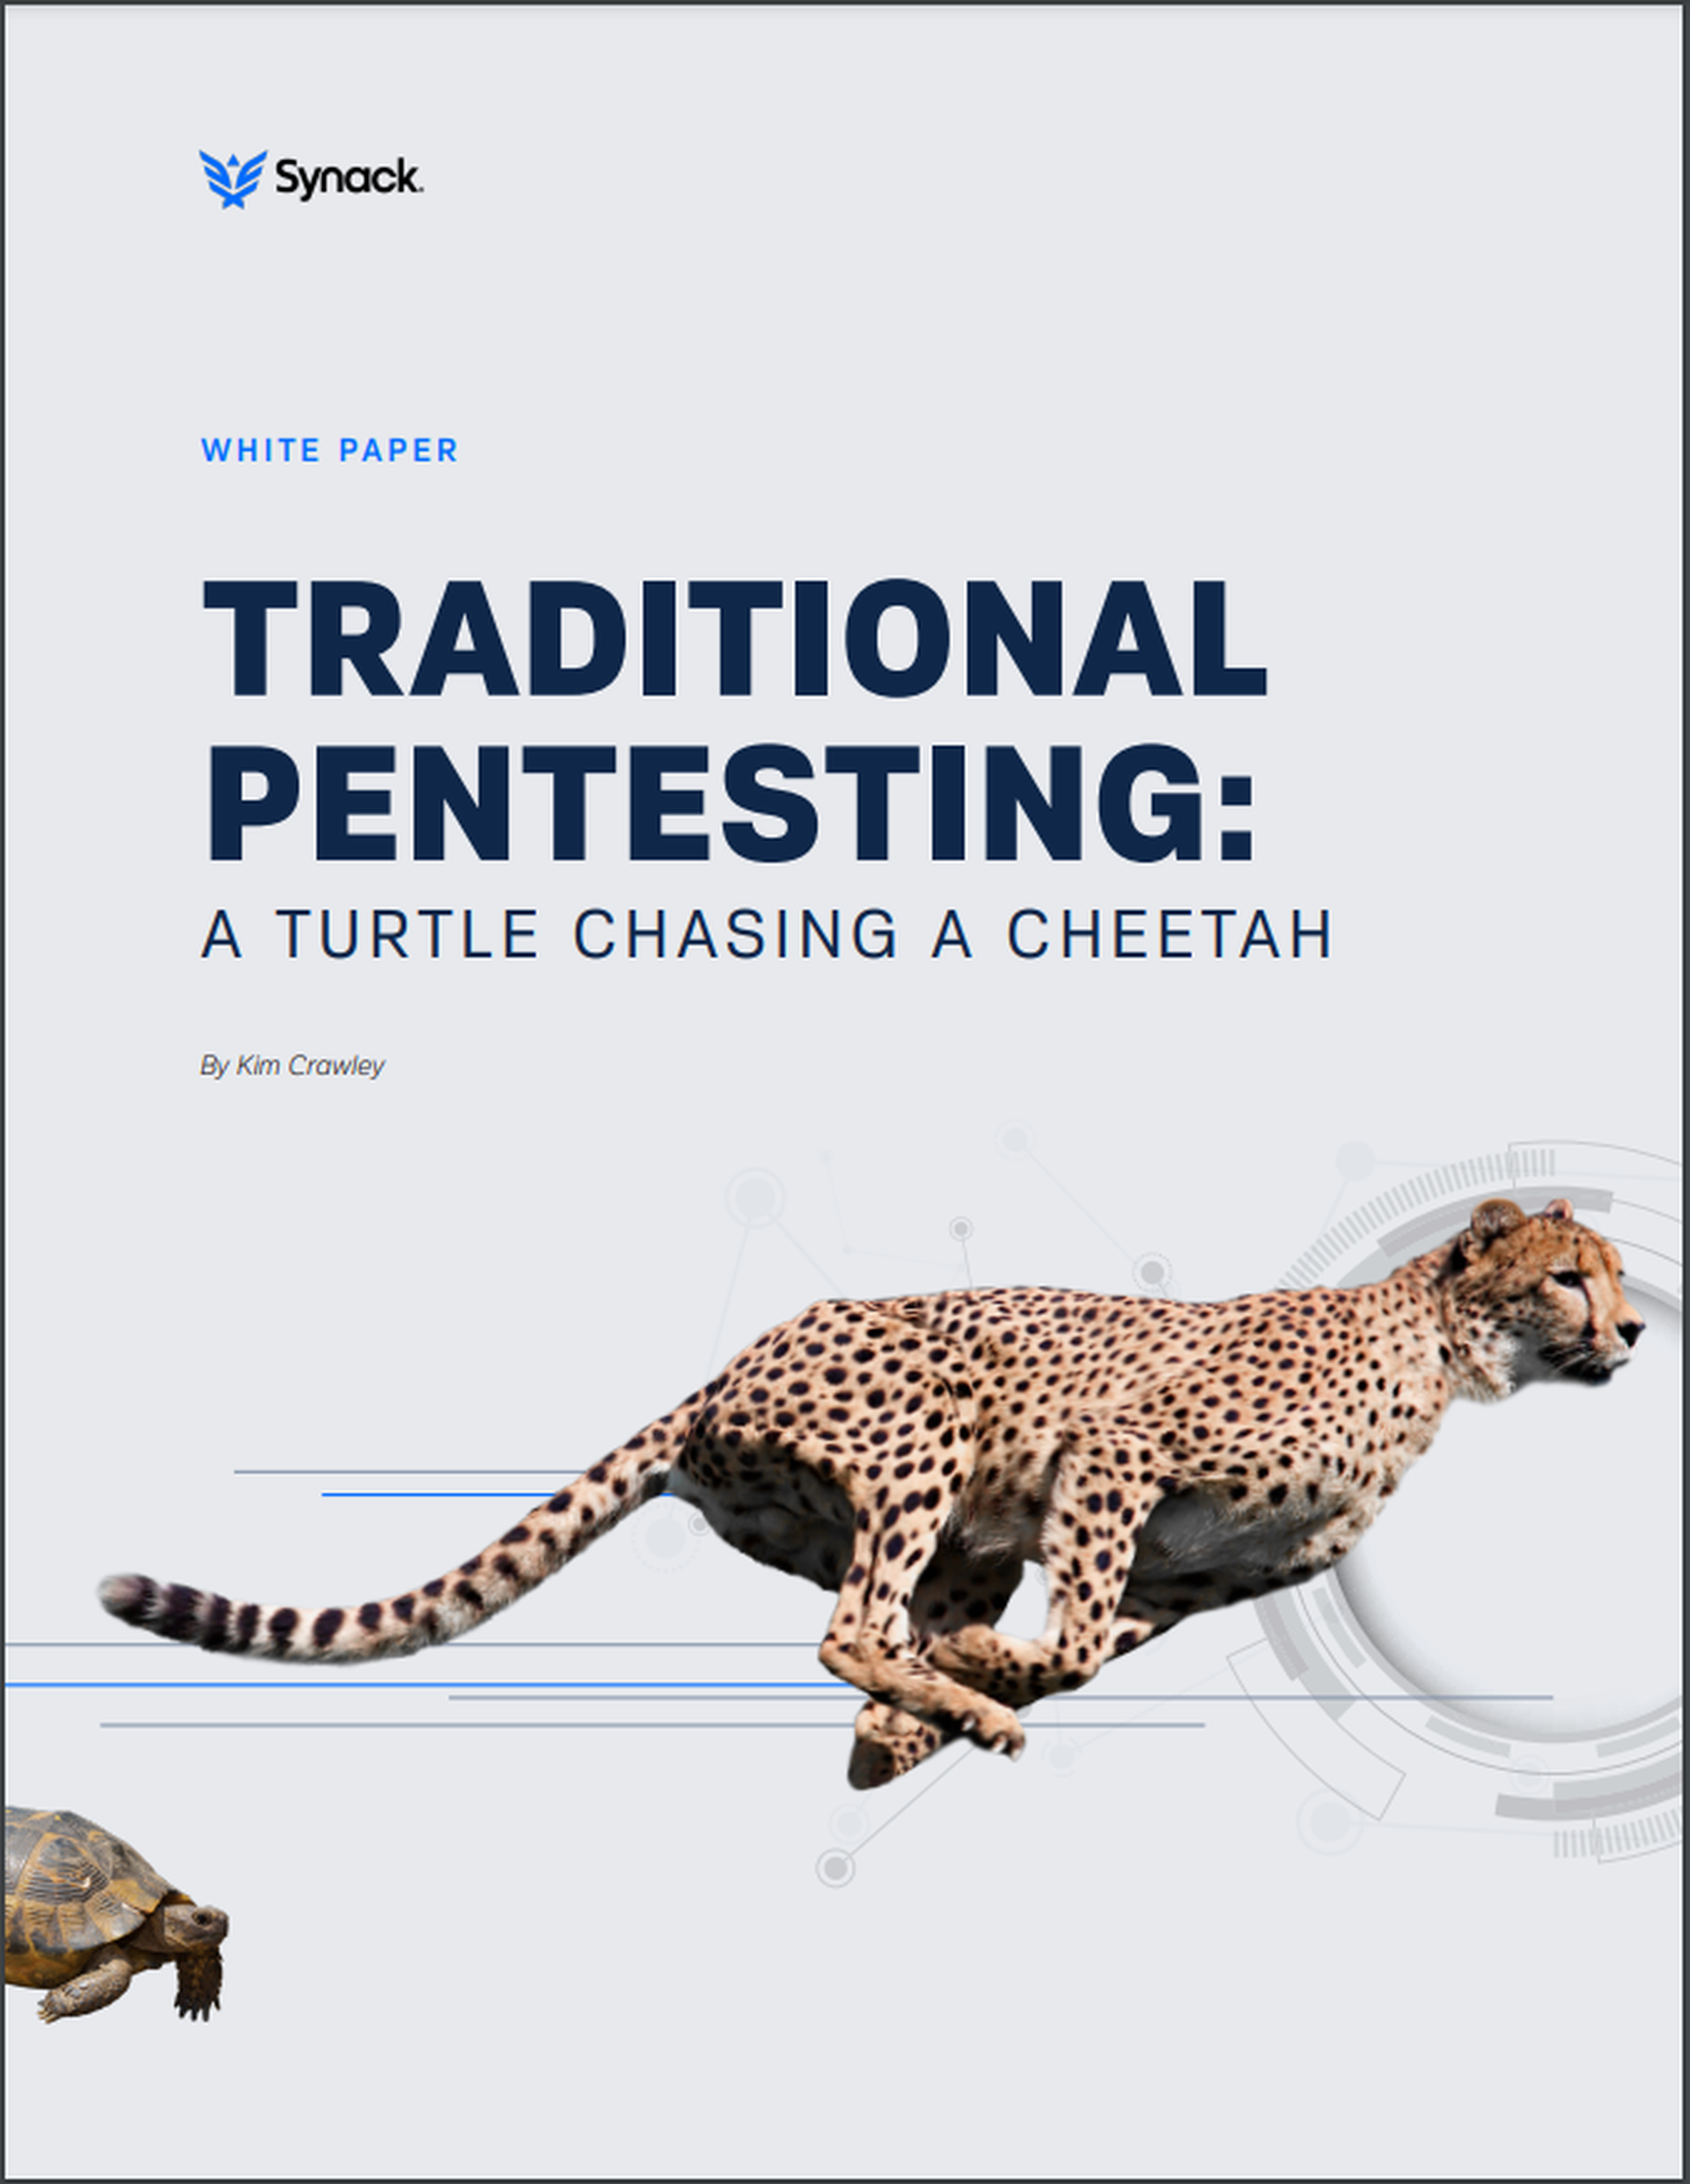 Why Pentesting Needs to Evolve